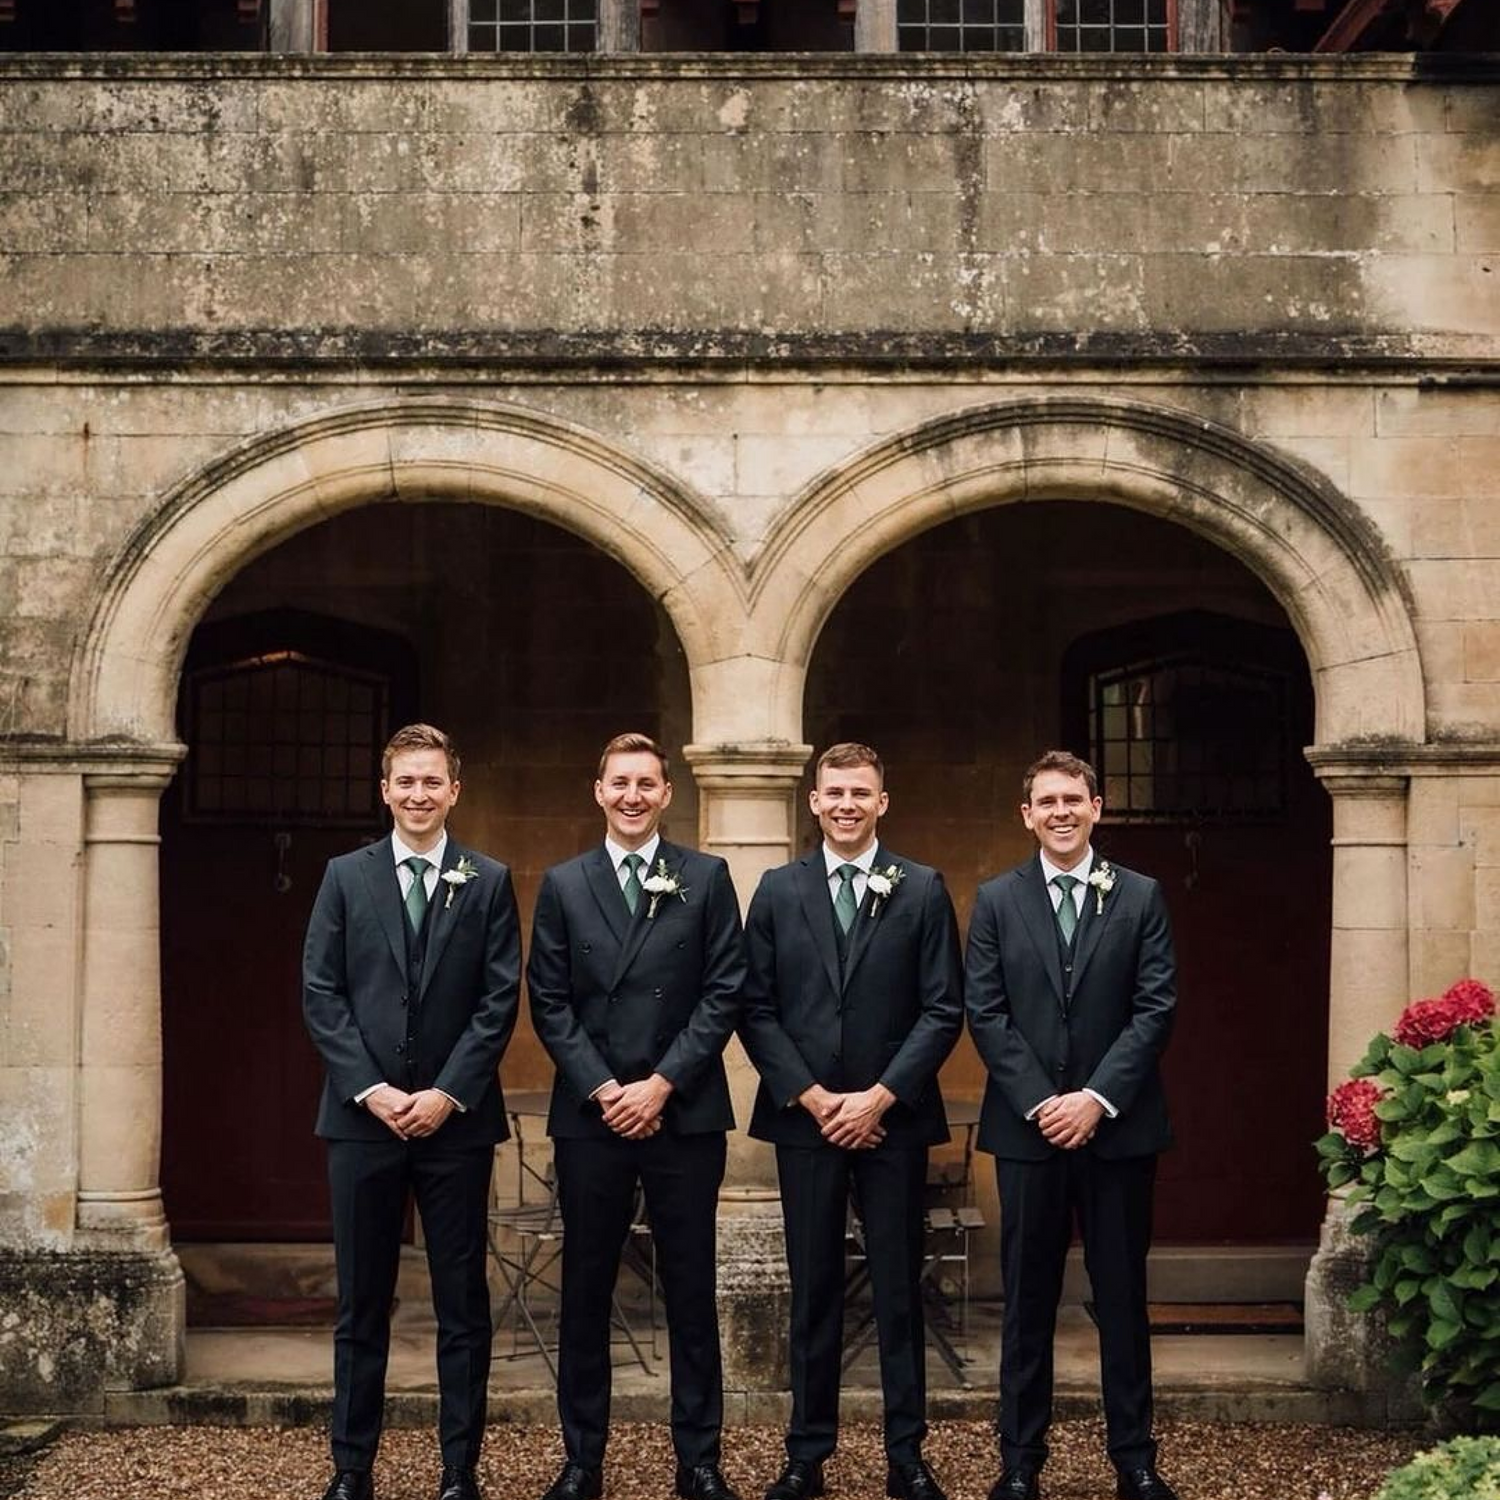 Groomsmen double breasted navy tailored suits